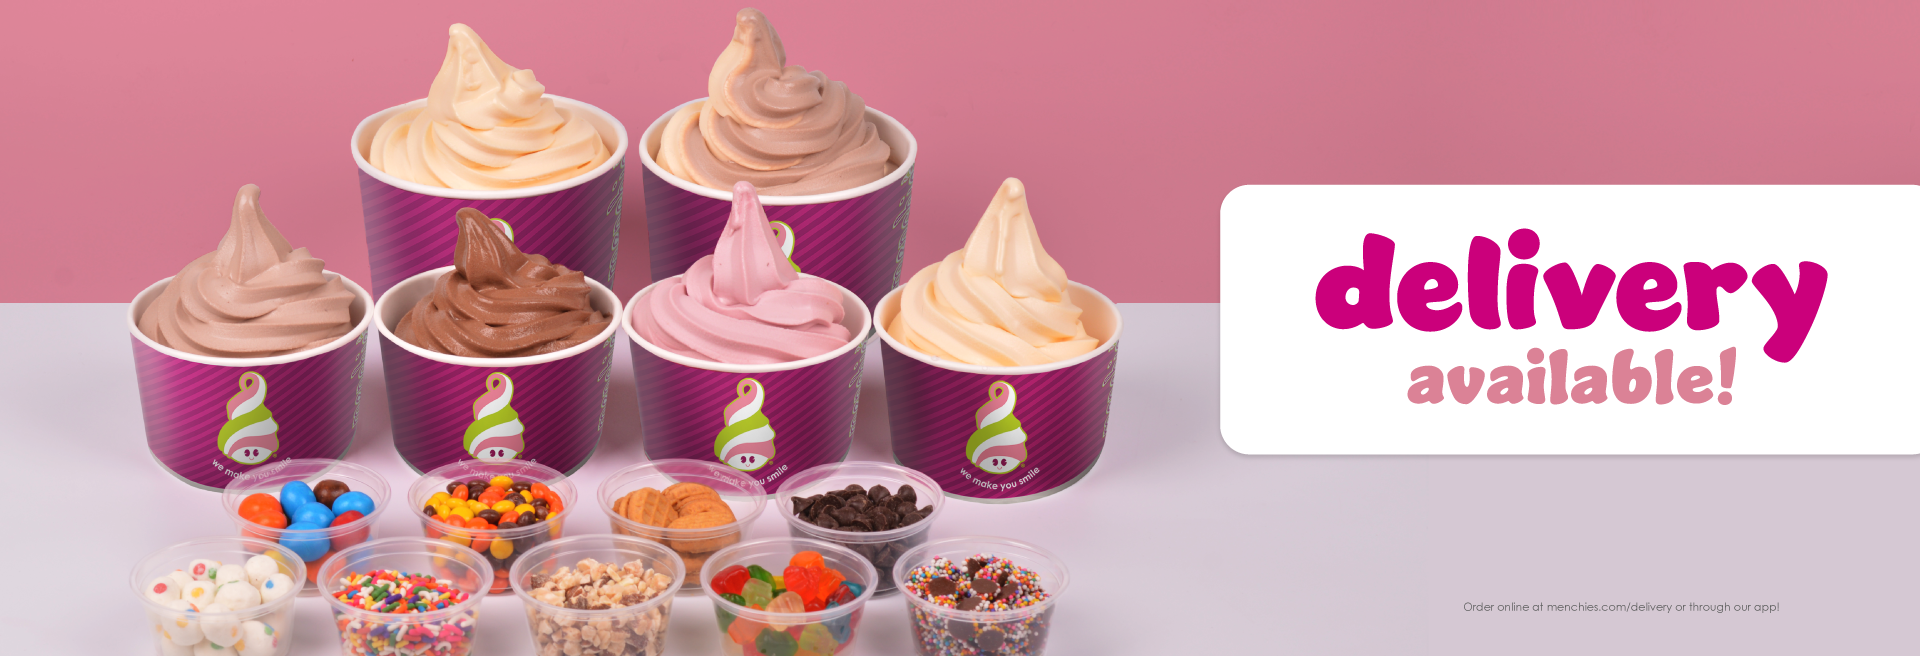 Froyo right at your door when you order a Menchie’s delivery!